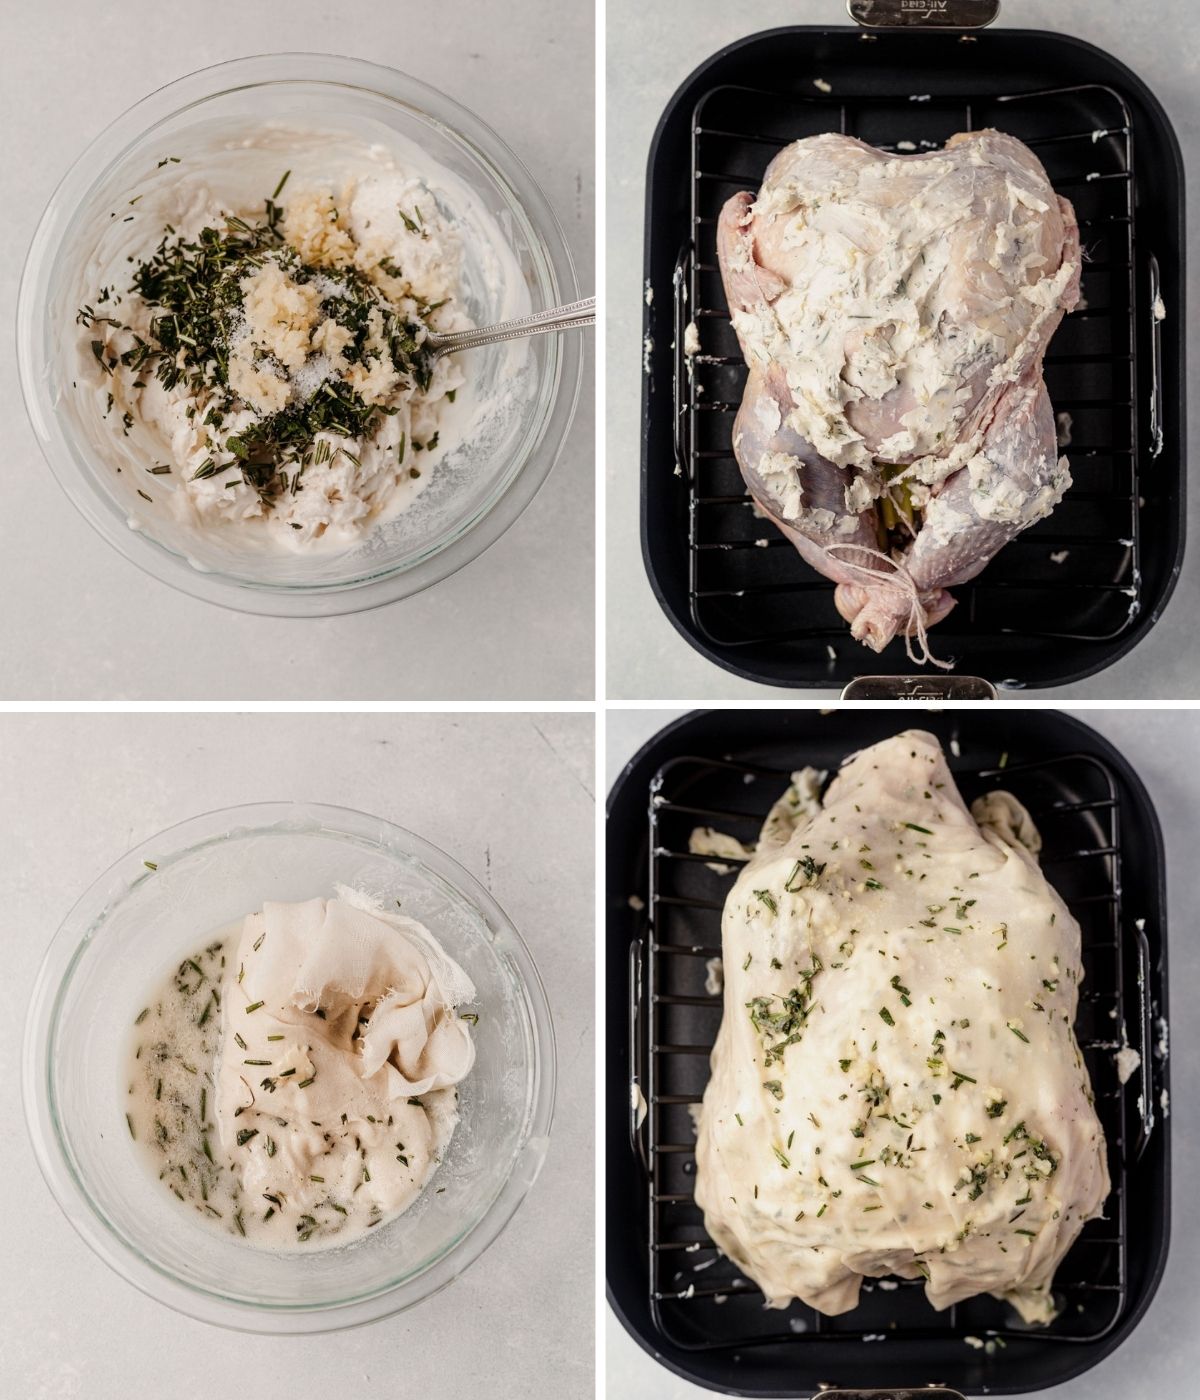 4 images showing how to make compound butter and soaking it in a cheesecloth to cover a turkey